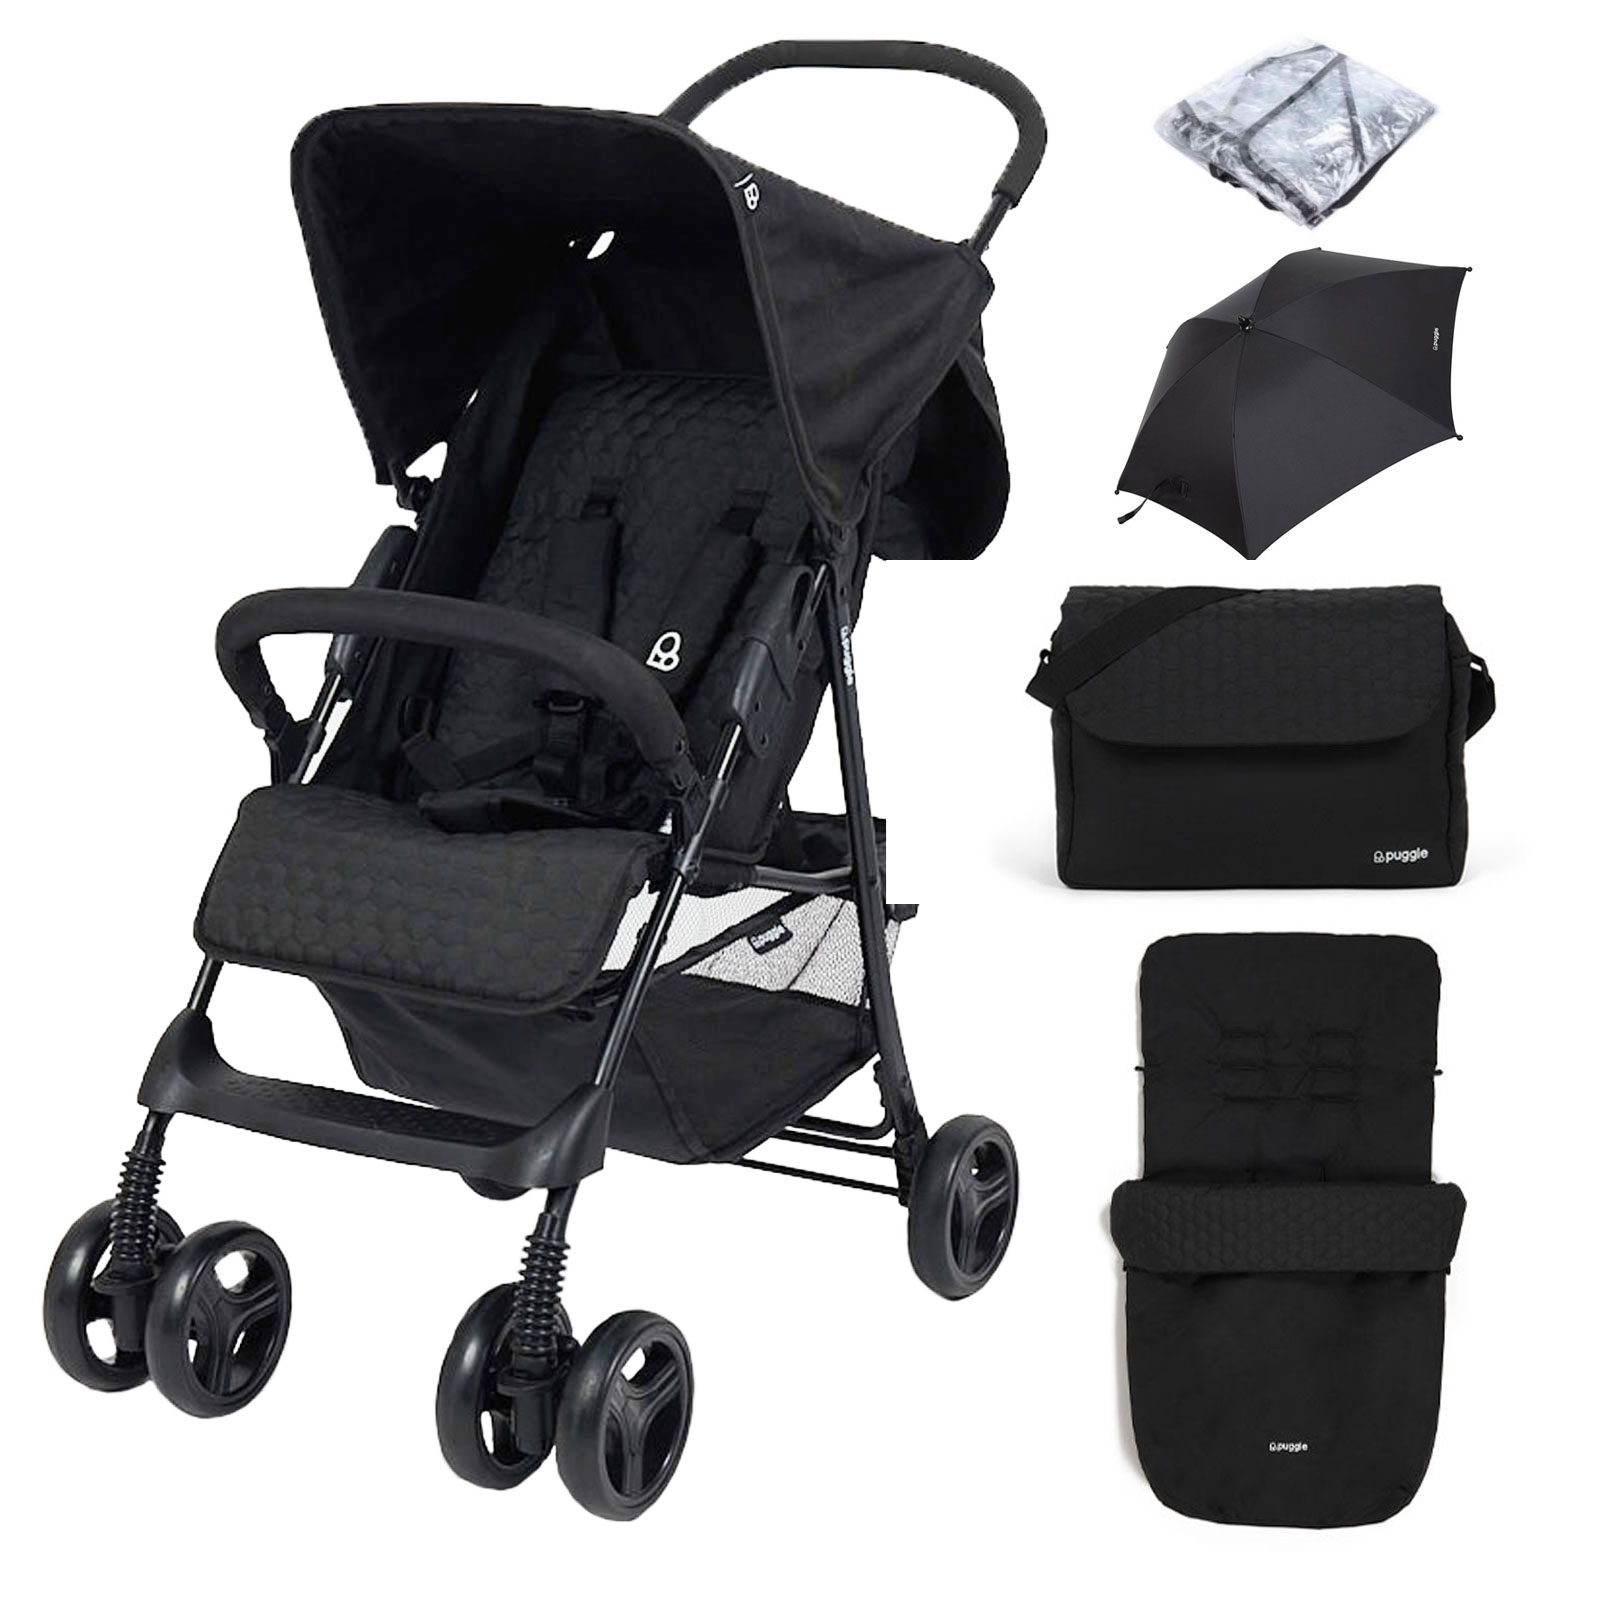 Puggle Holiday Luxe Pushchair Stroller with Raincover, Universal Footmuff, Parasol, Changing Bag and Mat – Storm Black